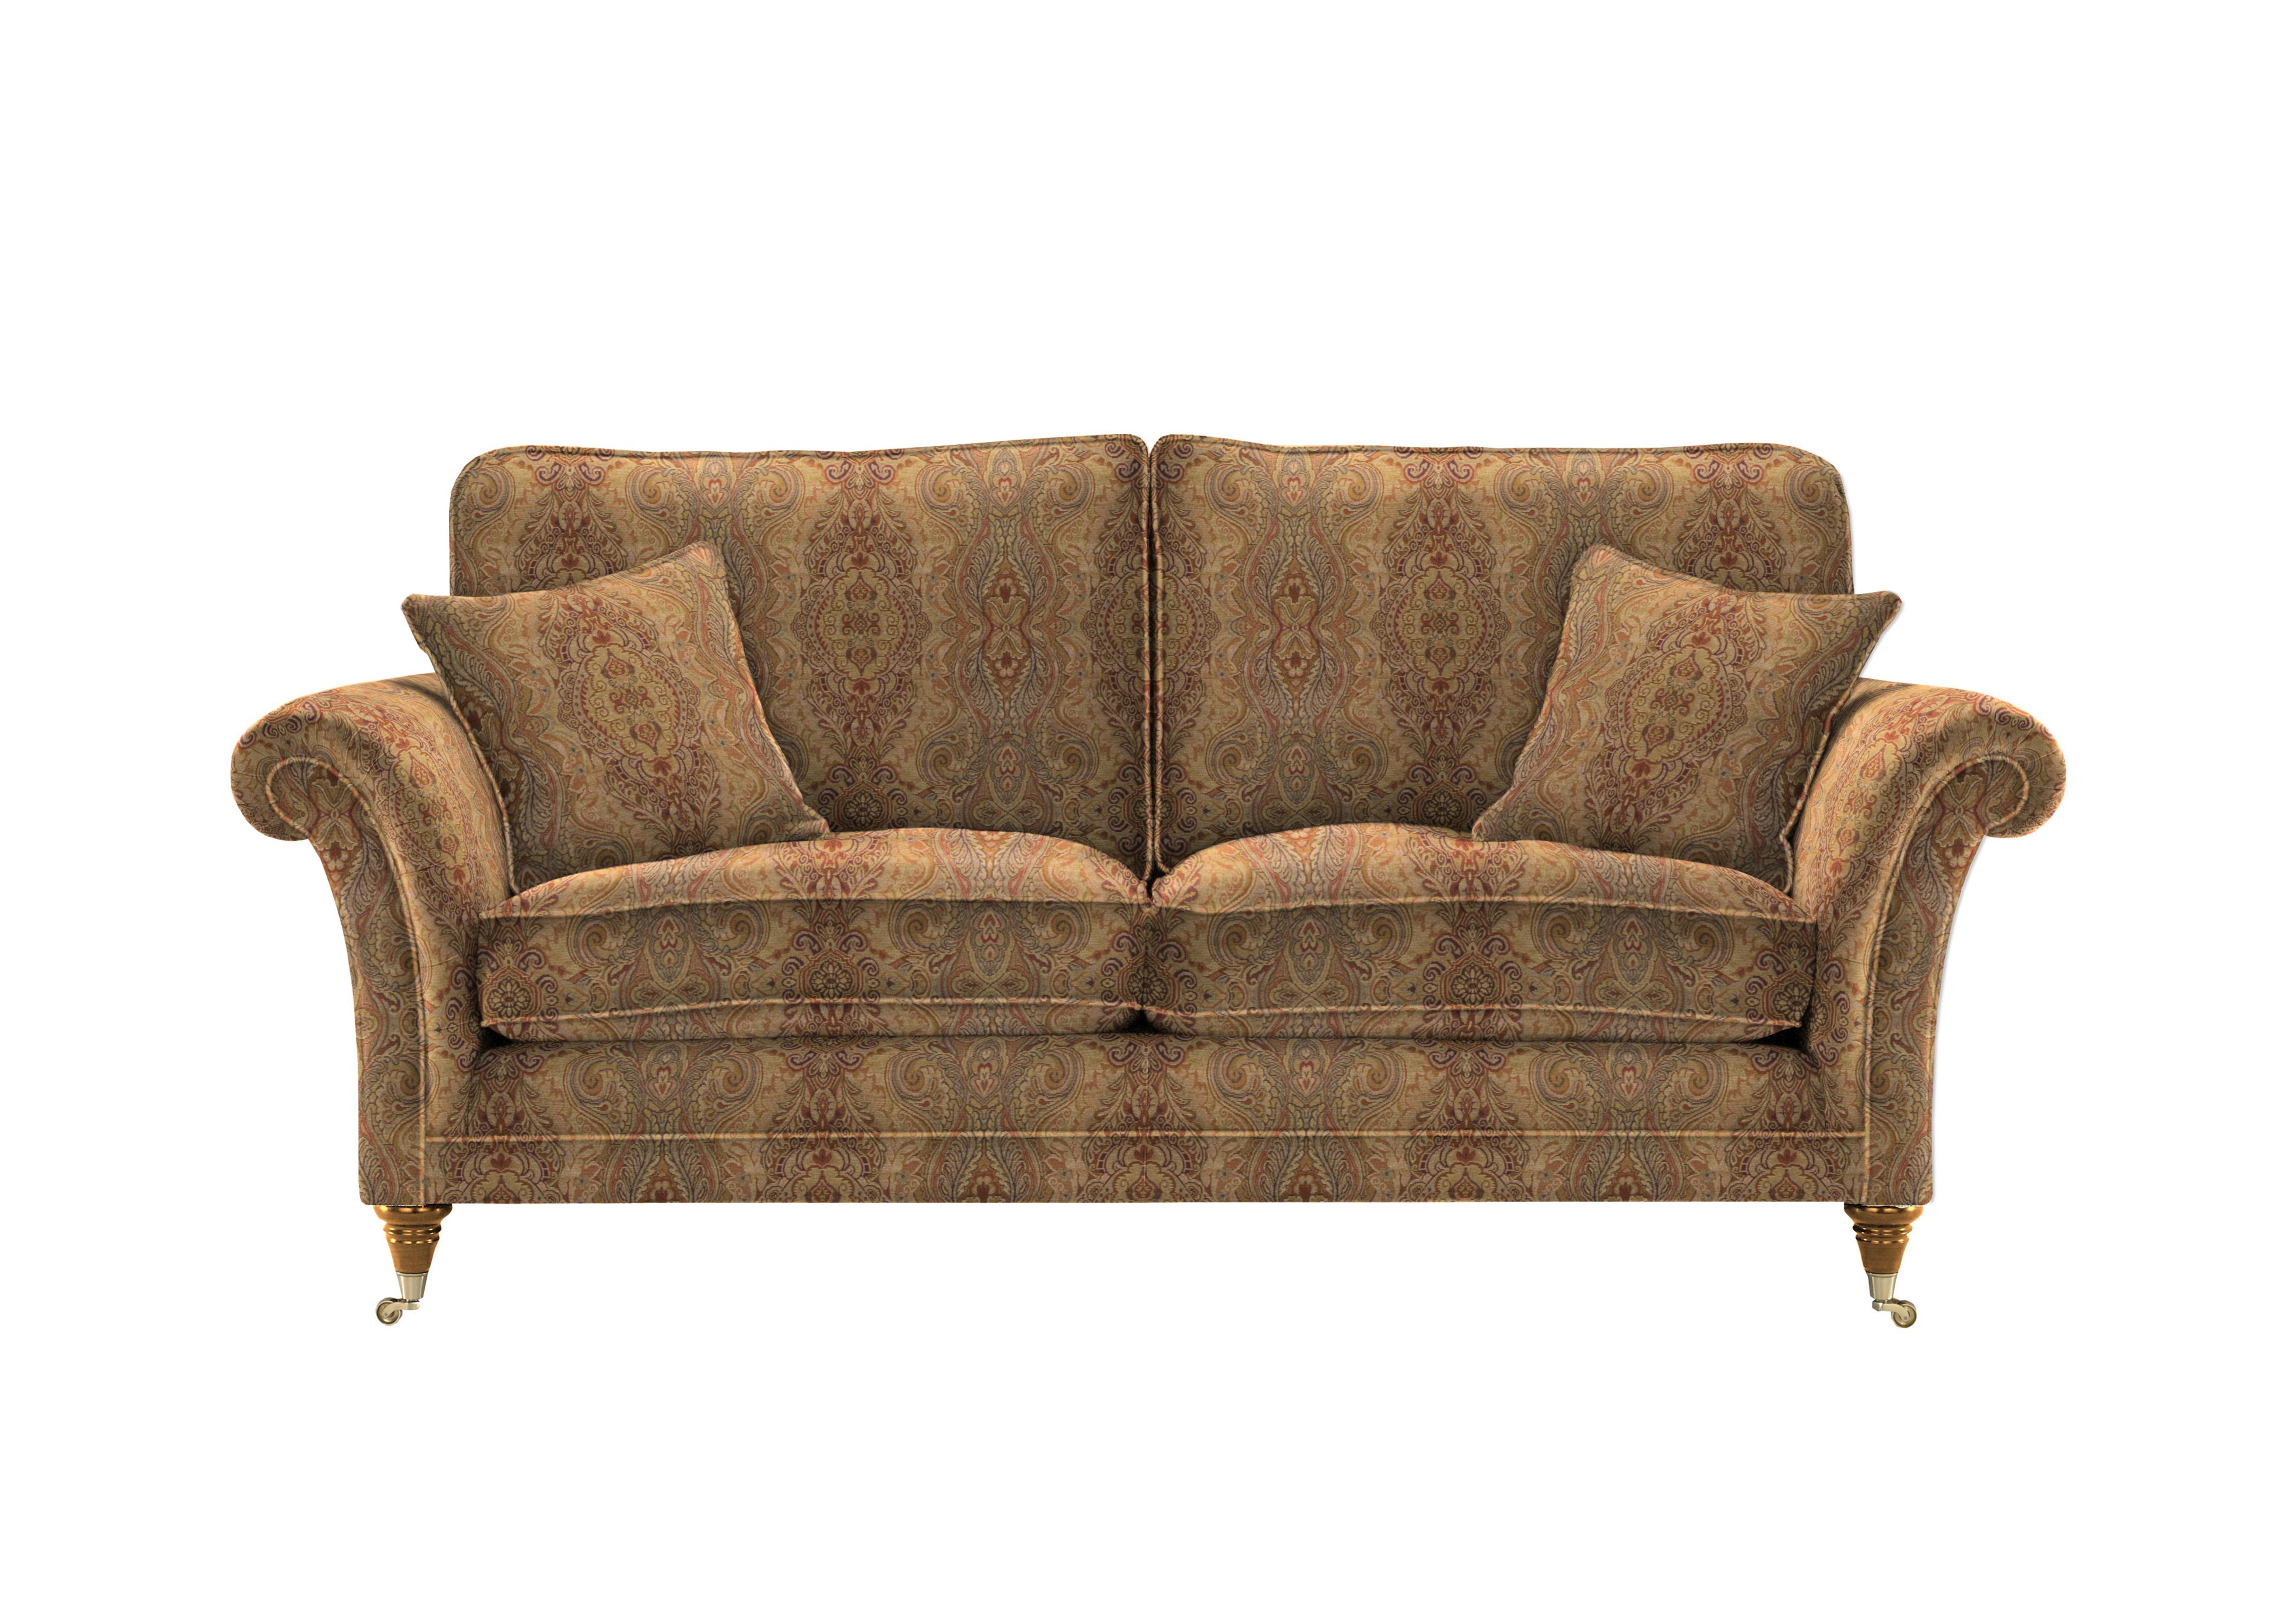 Burghley Large 2 Seater Fabric Sofa in 050026-318 Baslow Medalli Gold on Furniture Village